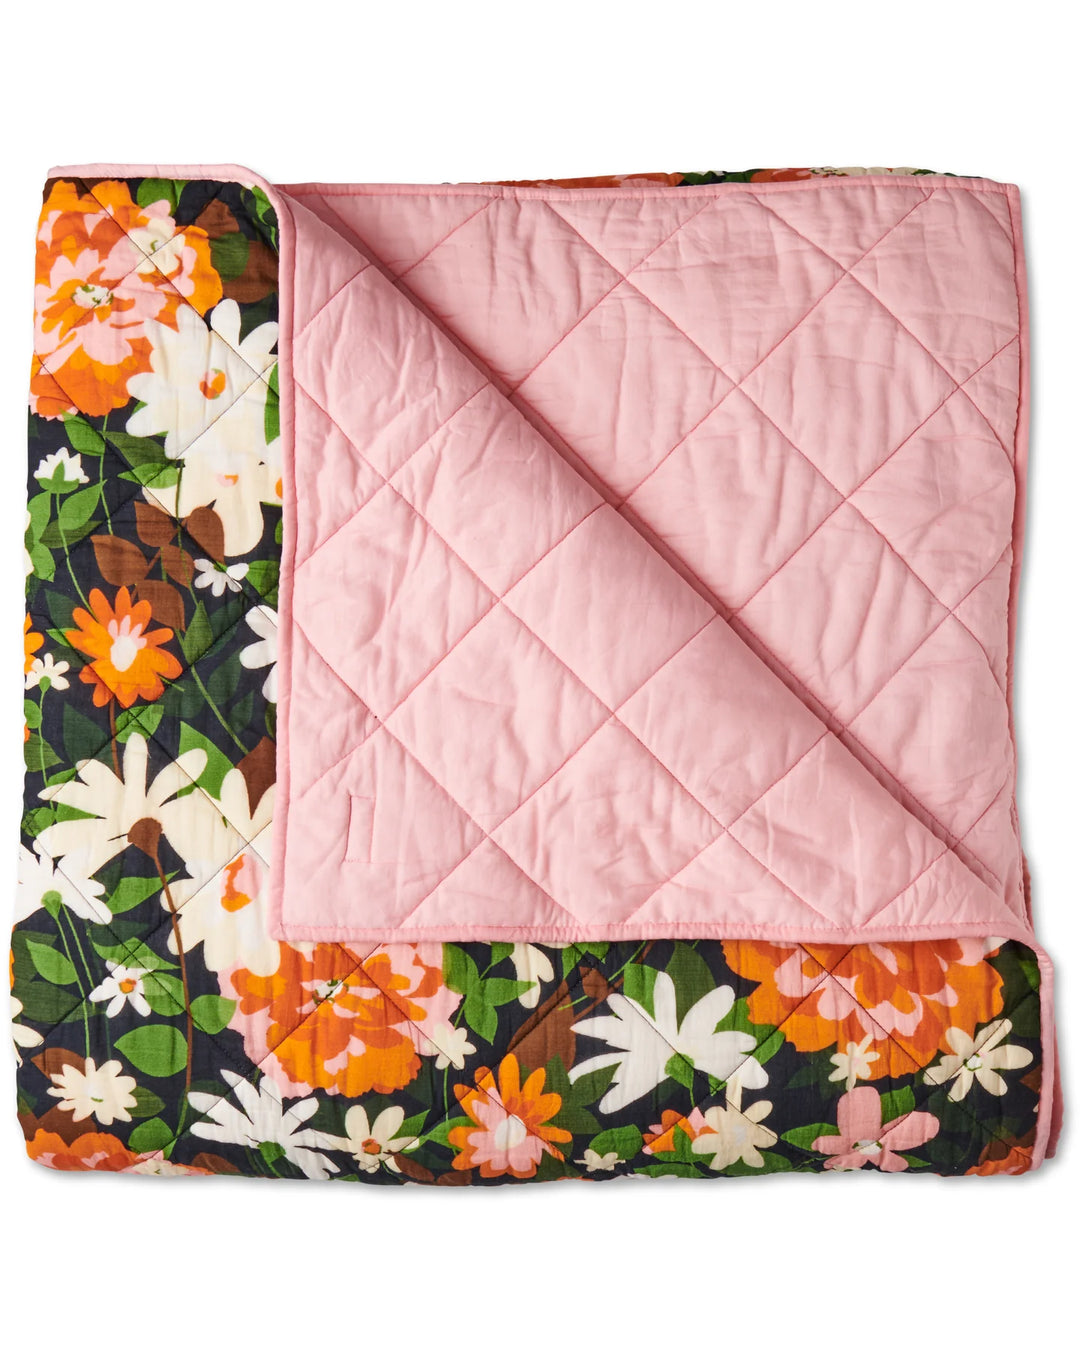 Kip & Co Dreamy Floral Organic Cotton Quilted Bedspread